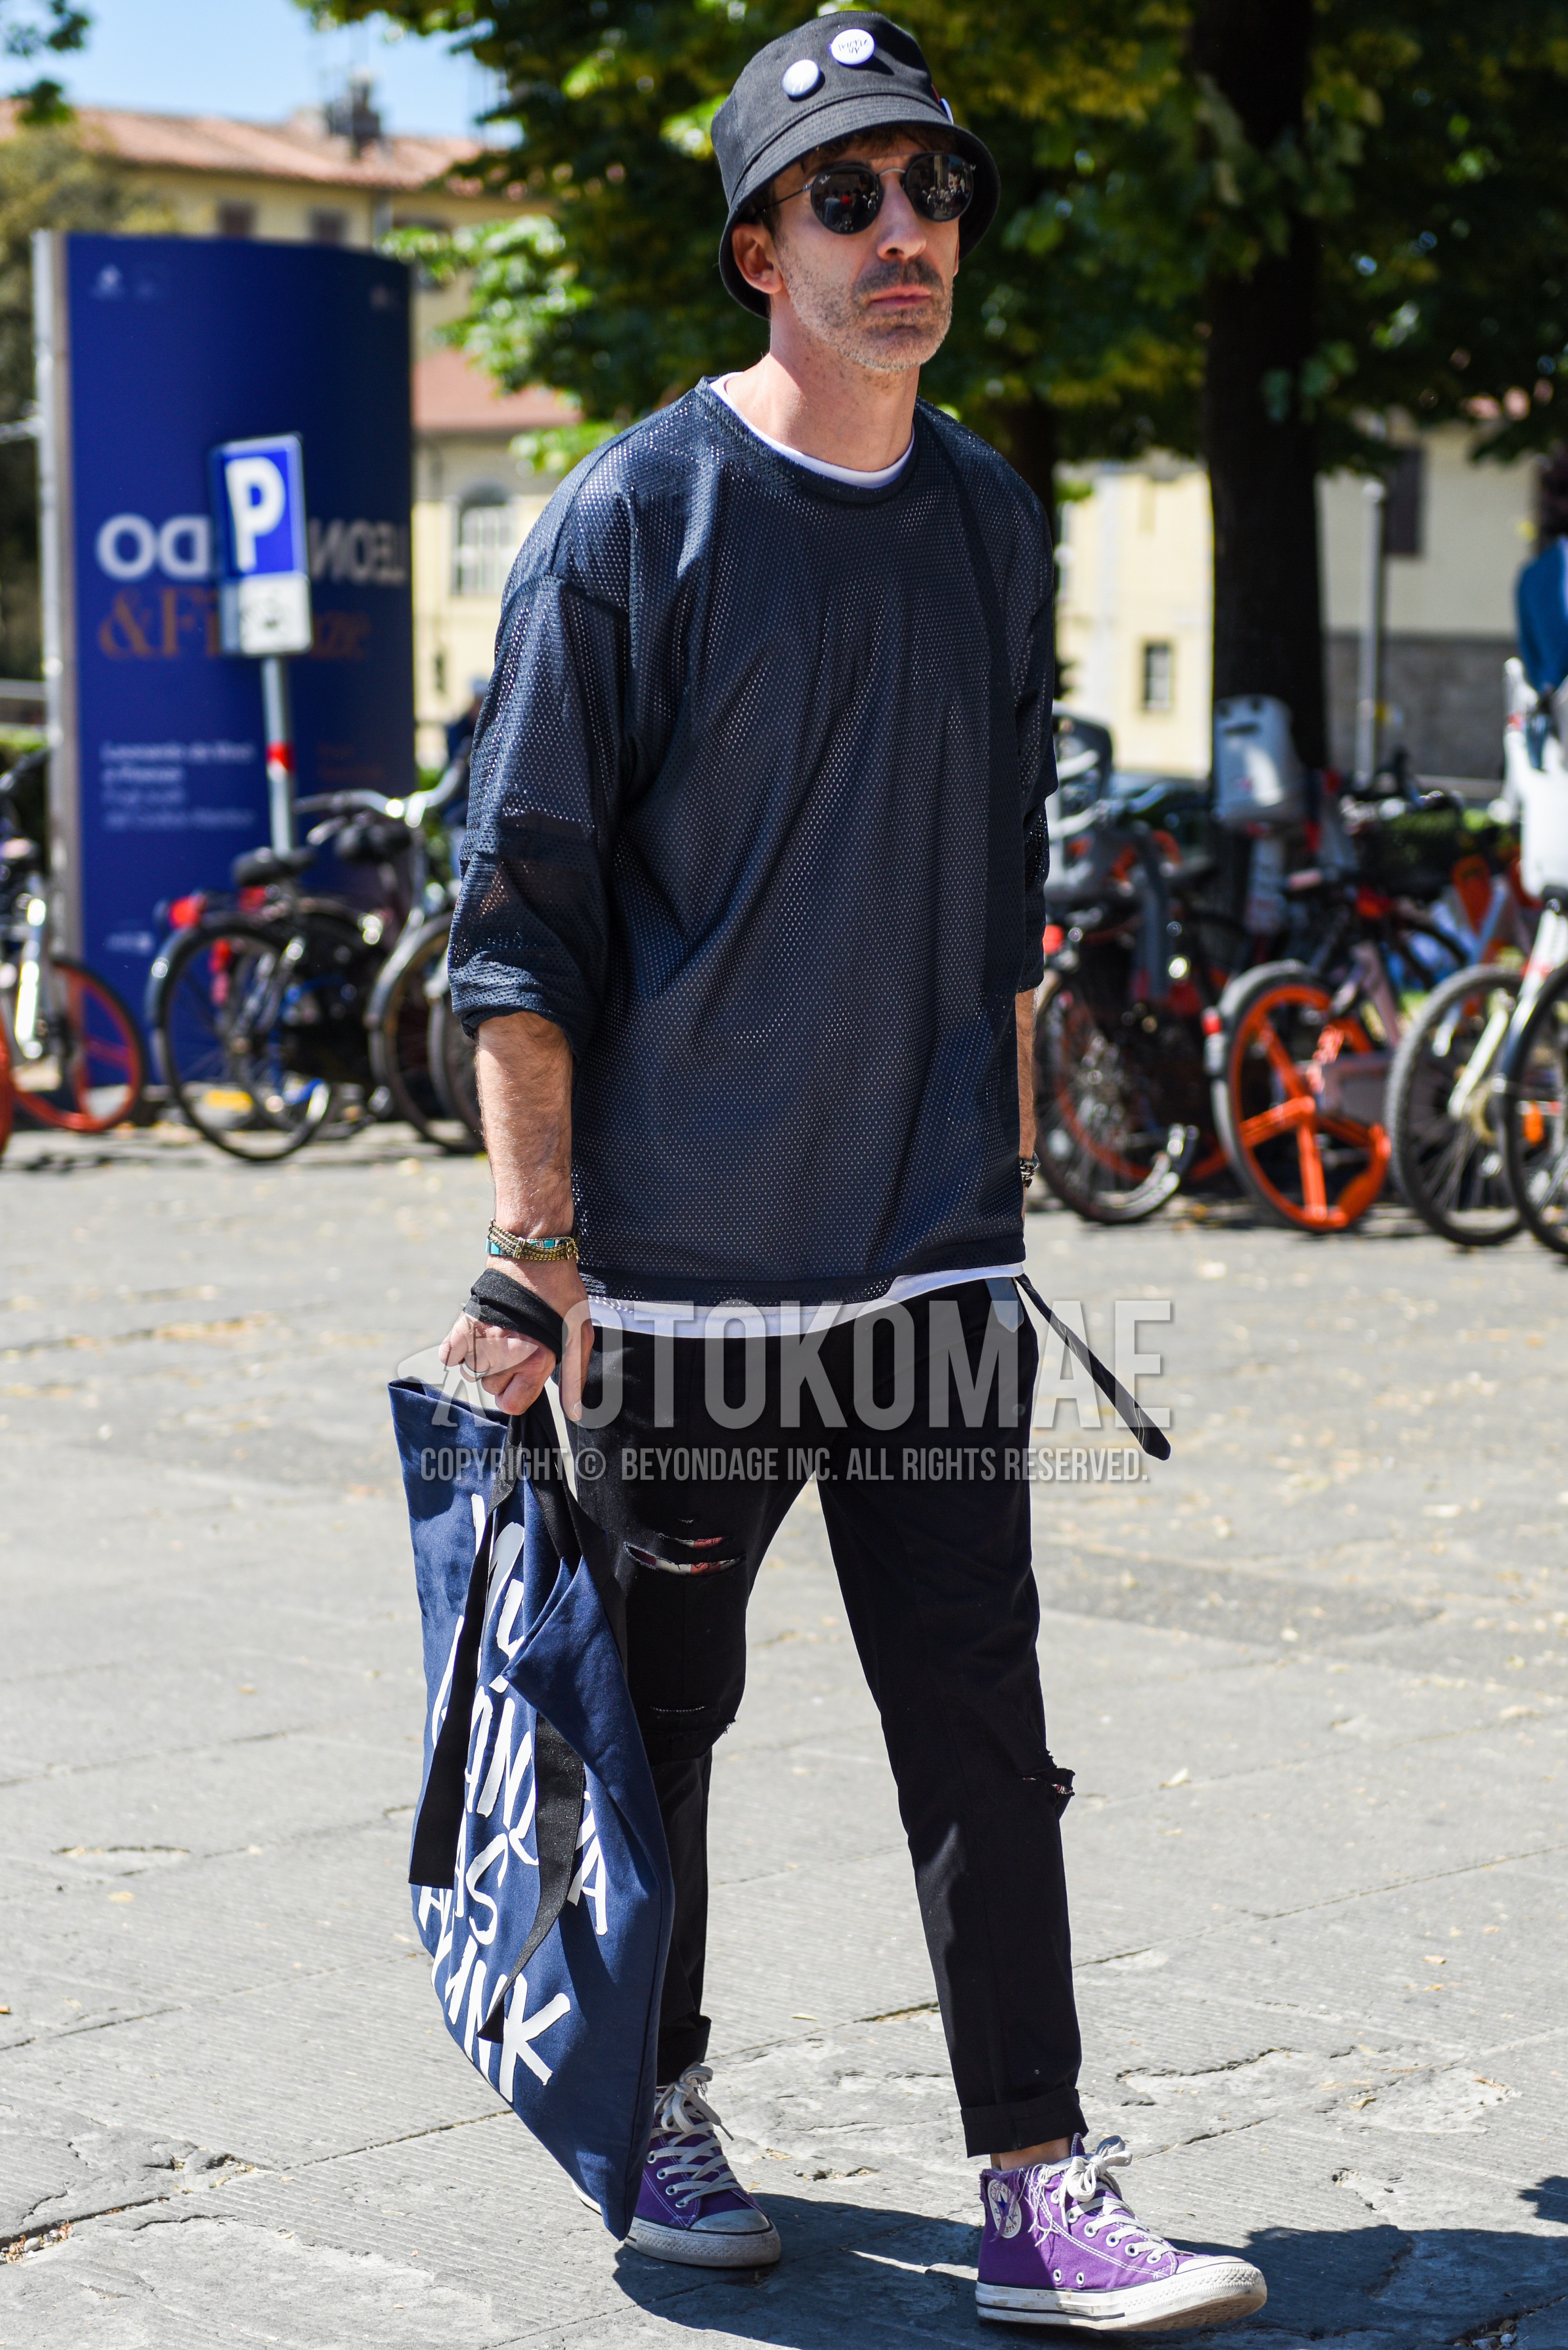 Men's spring summer outfit with black plain hat, black plain sunglasses, black plain t-shirt, white plain t-shirt, black plain damaged jeans, purple high-cut sneakers, navy graphic tote bag.